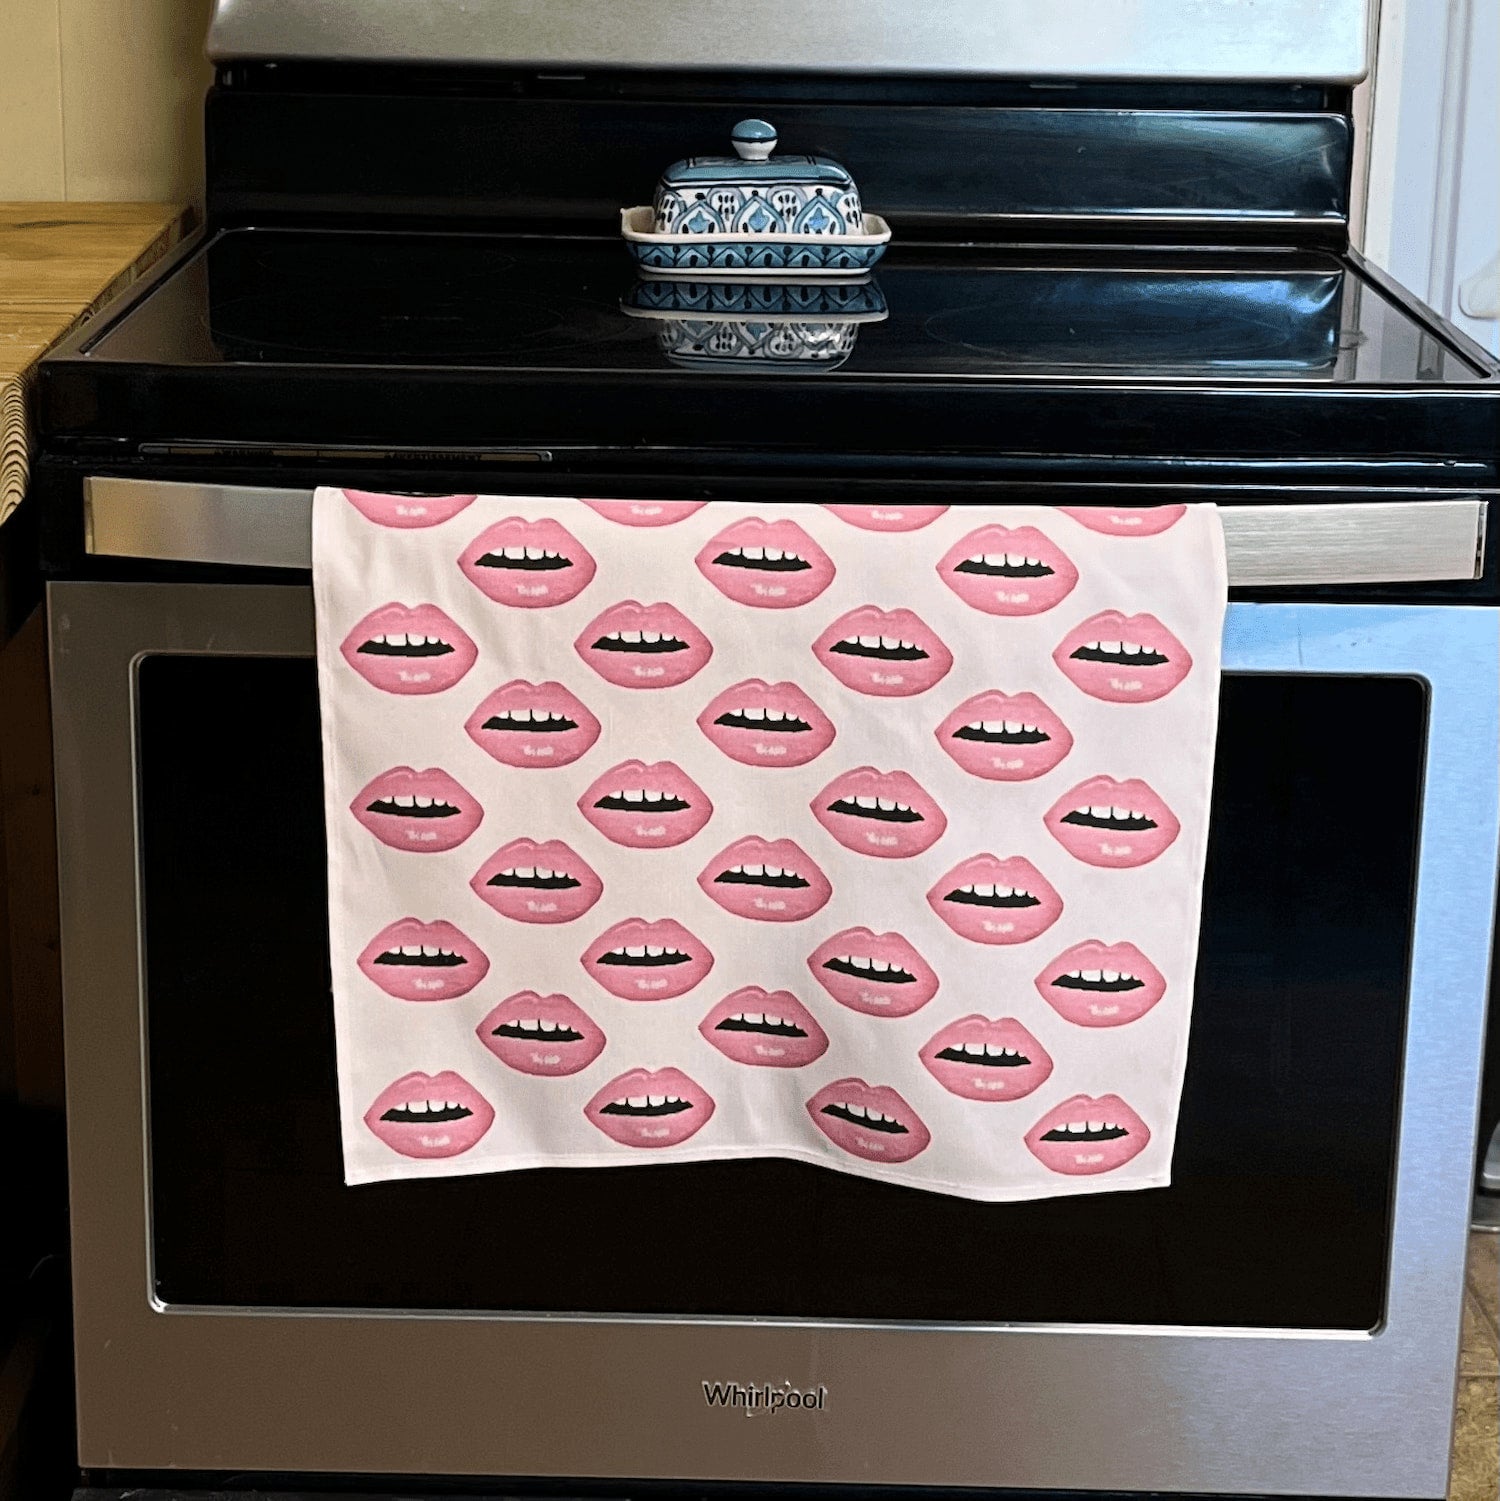 linen-colored tea towel with soft pink lips covered all over it